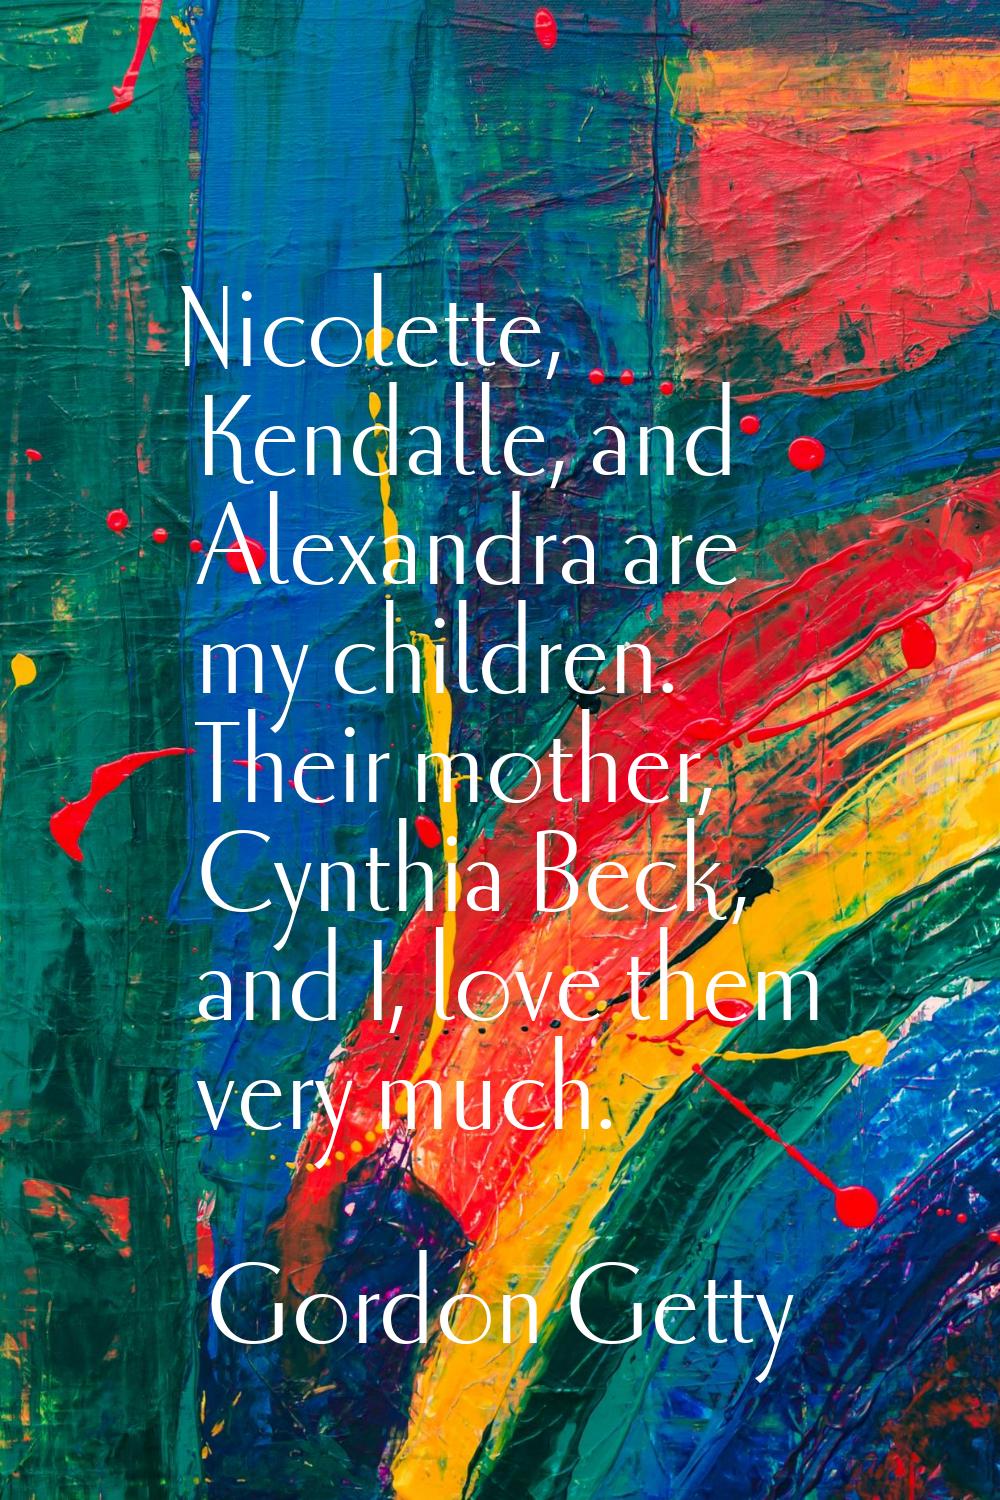 Nicolette, Kendalle, and Alexandra are my children. Their mother, Cynthia Beck, and I, love them ve